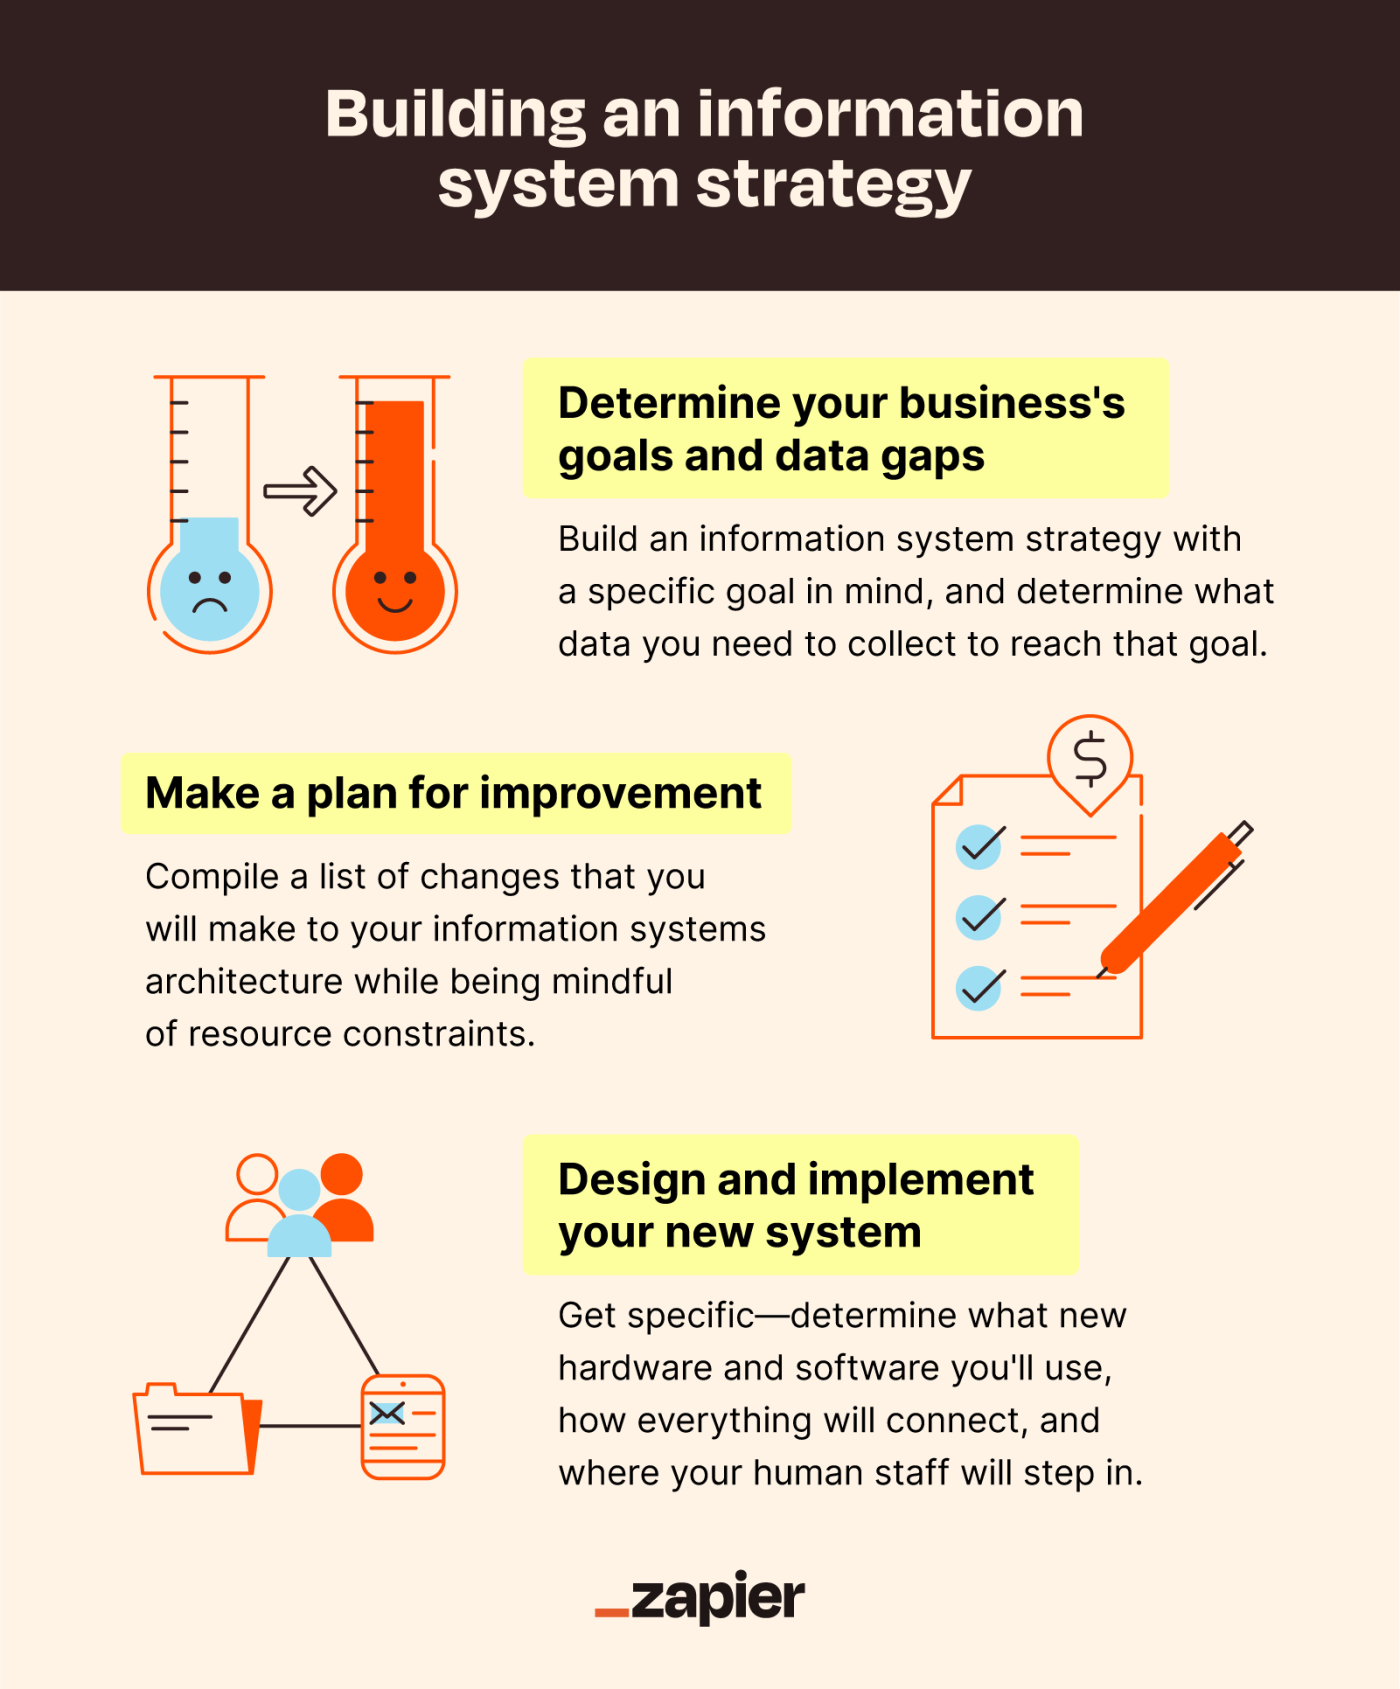 Image showing the steps for building an information system strategy. 